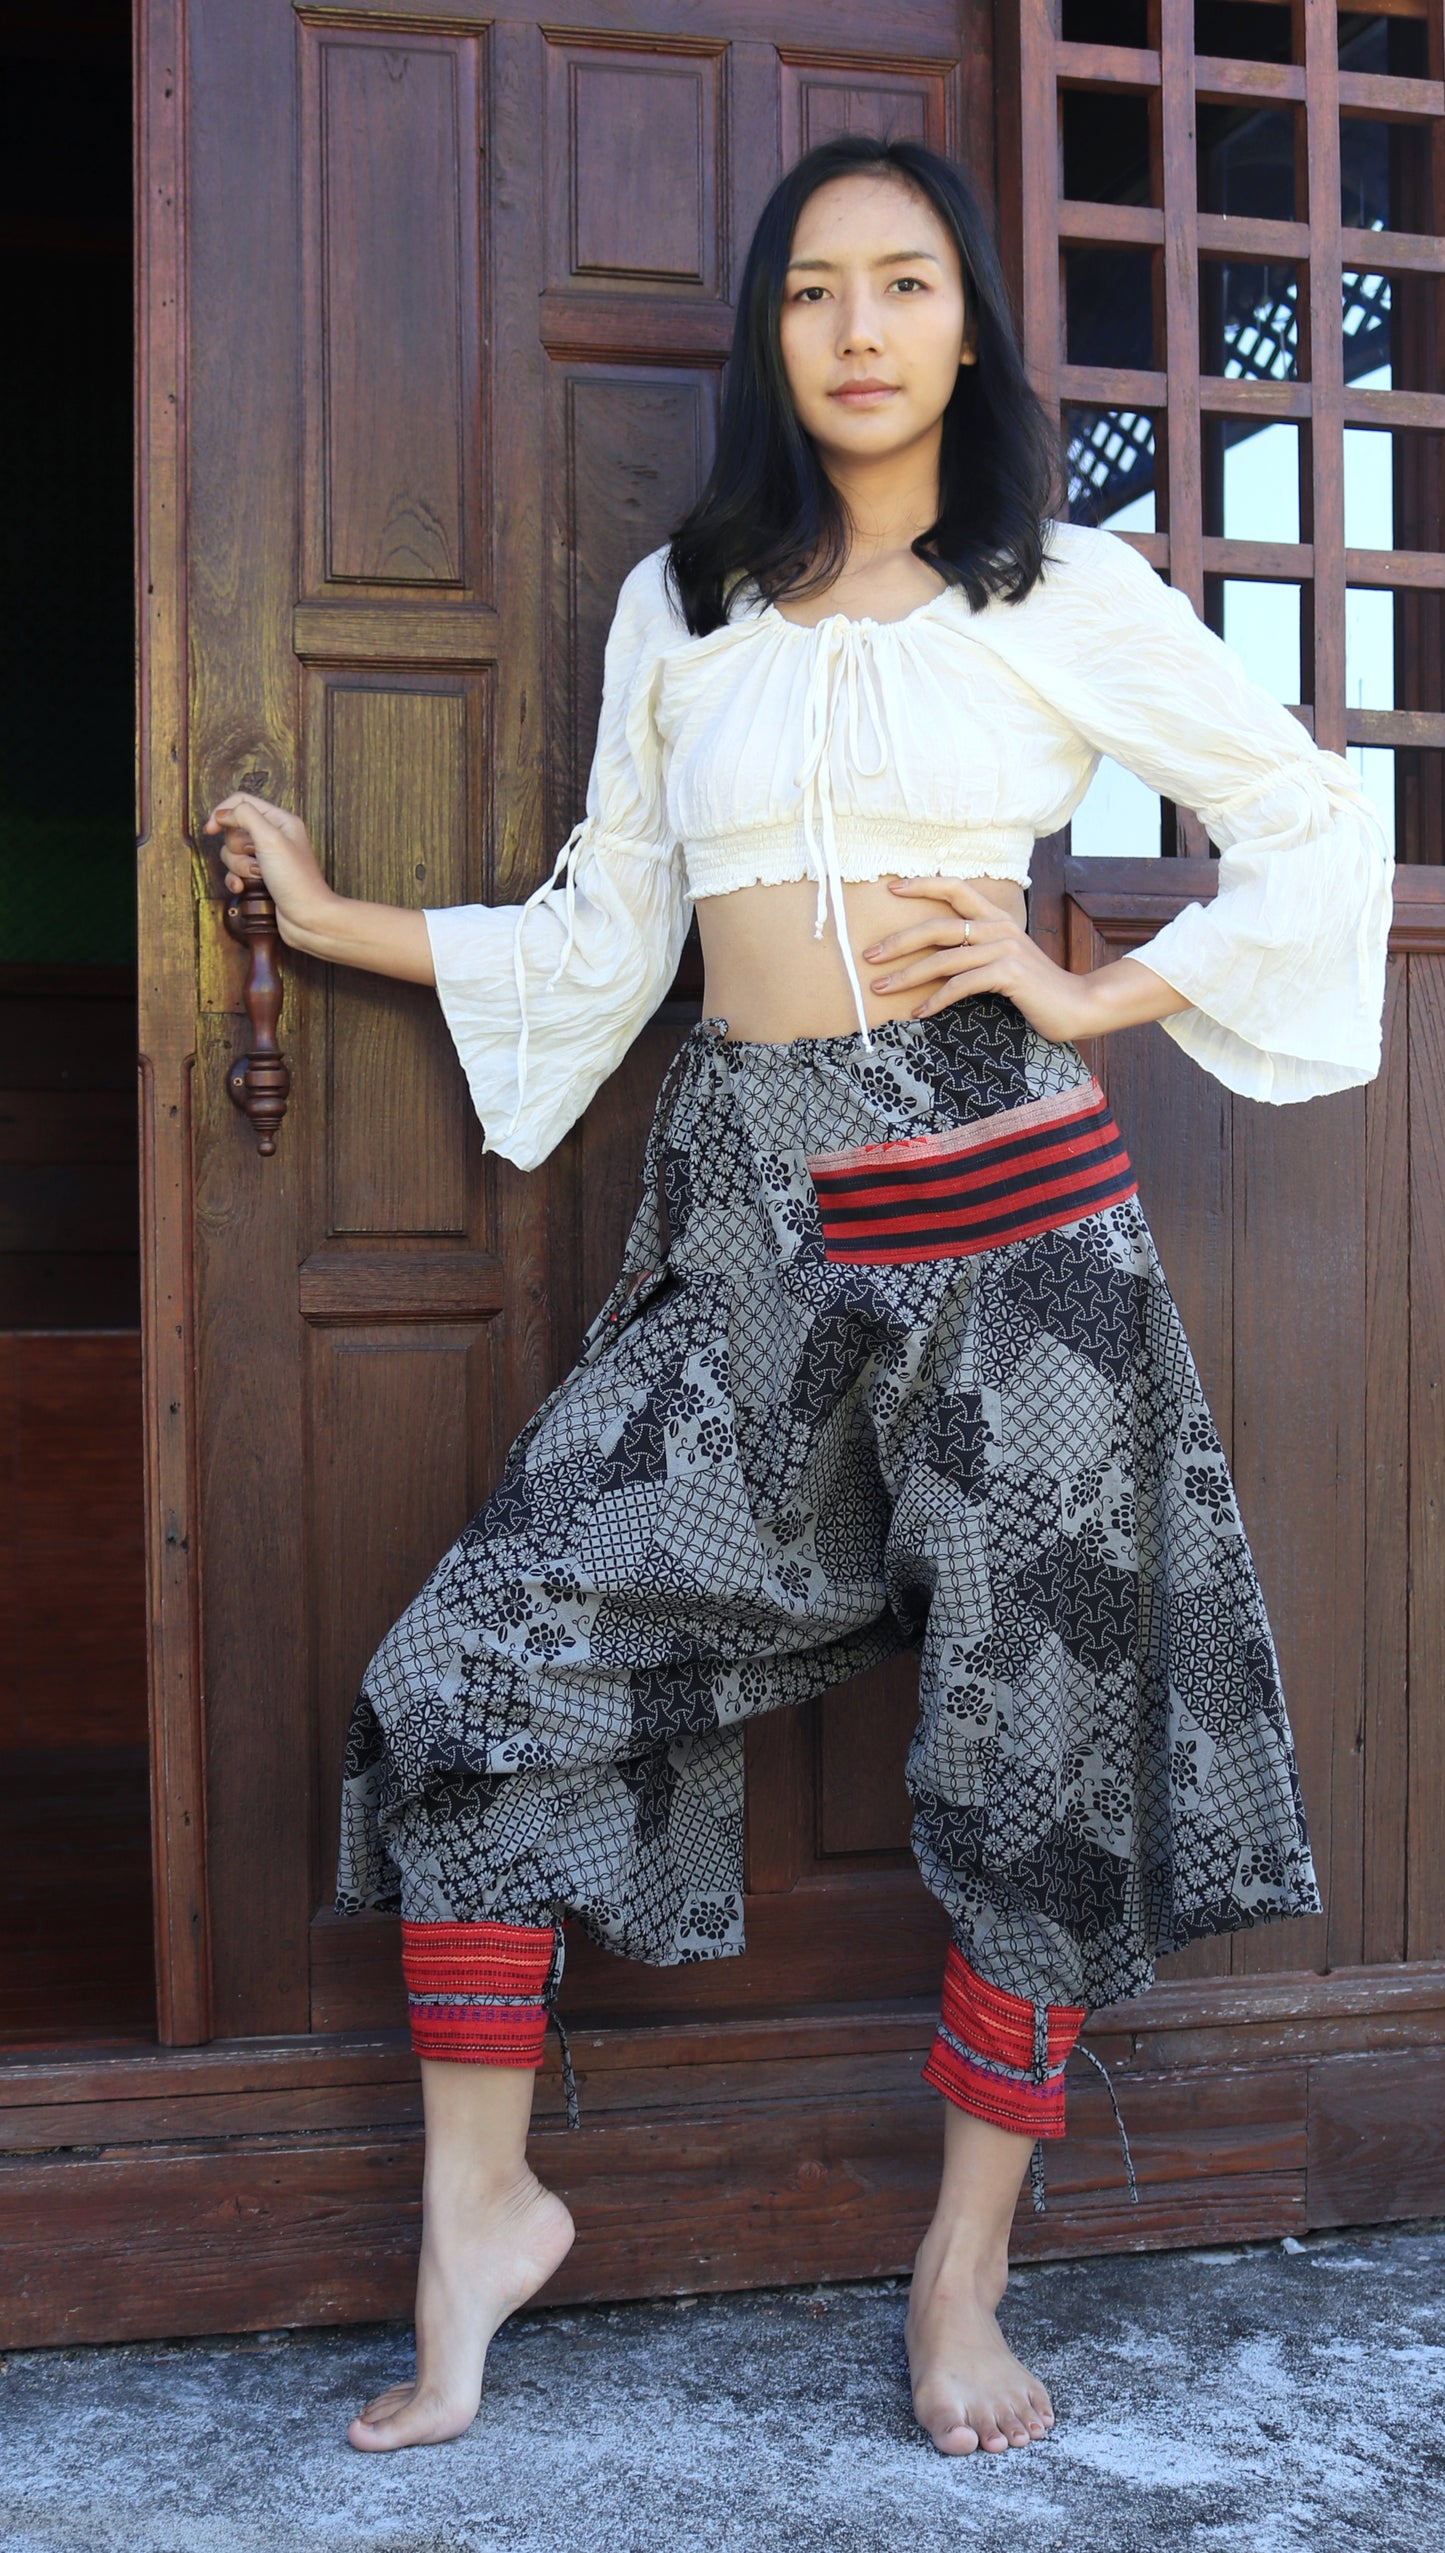 RaanPahMuang Japanese Formal Edo Courtesan Pants with Tied Cuffs and Woven Patches